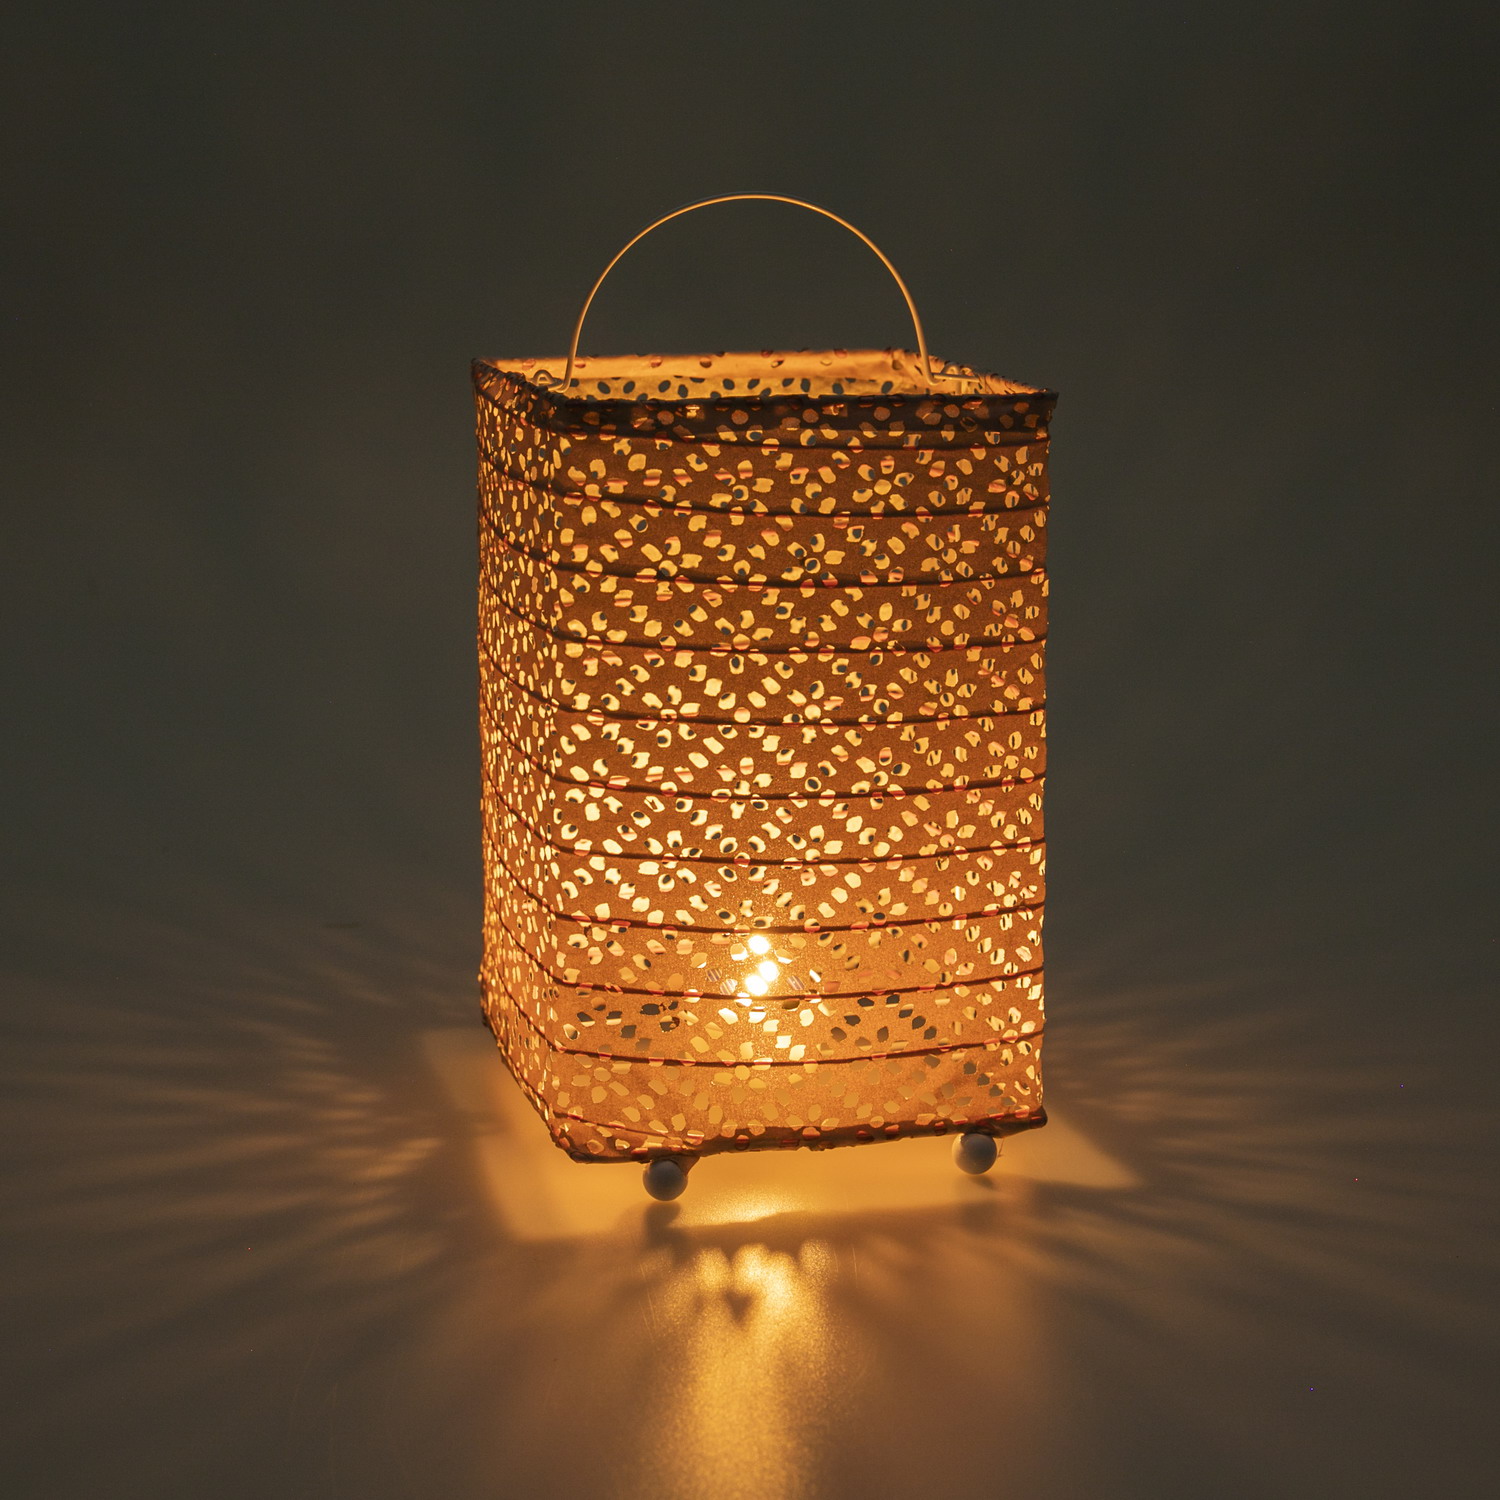 Wholesale Tabletop Solar Lanterns for Patio Decorative Collapsible Lantern | ZHONGXIN Featured Image